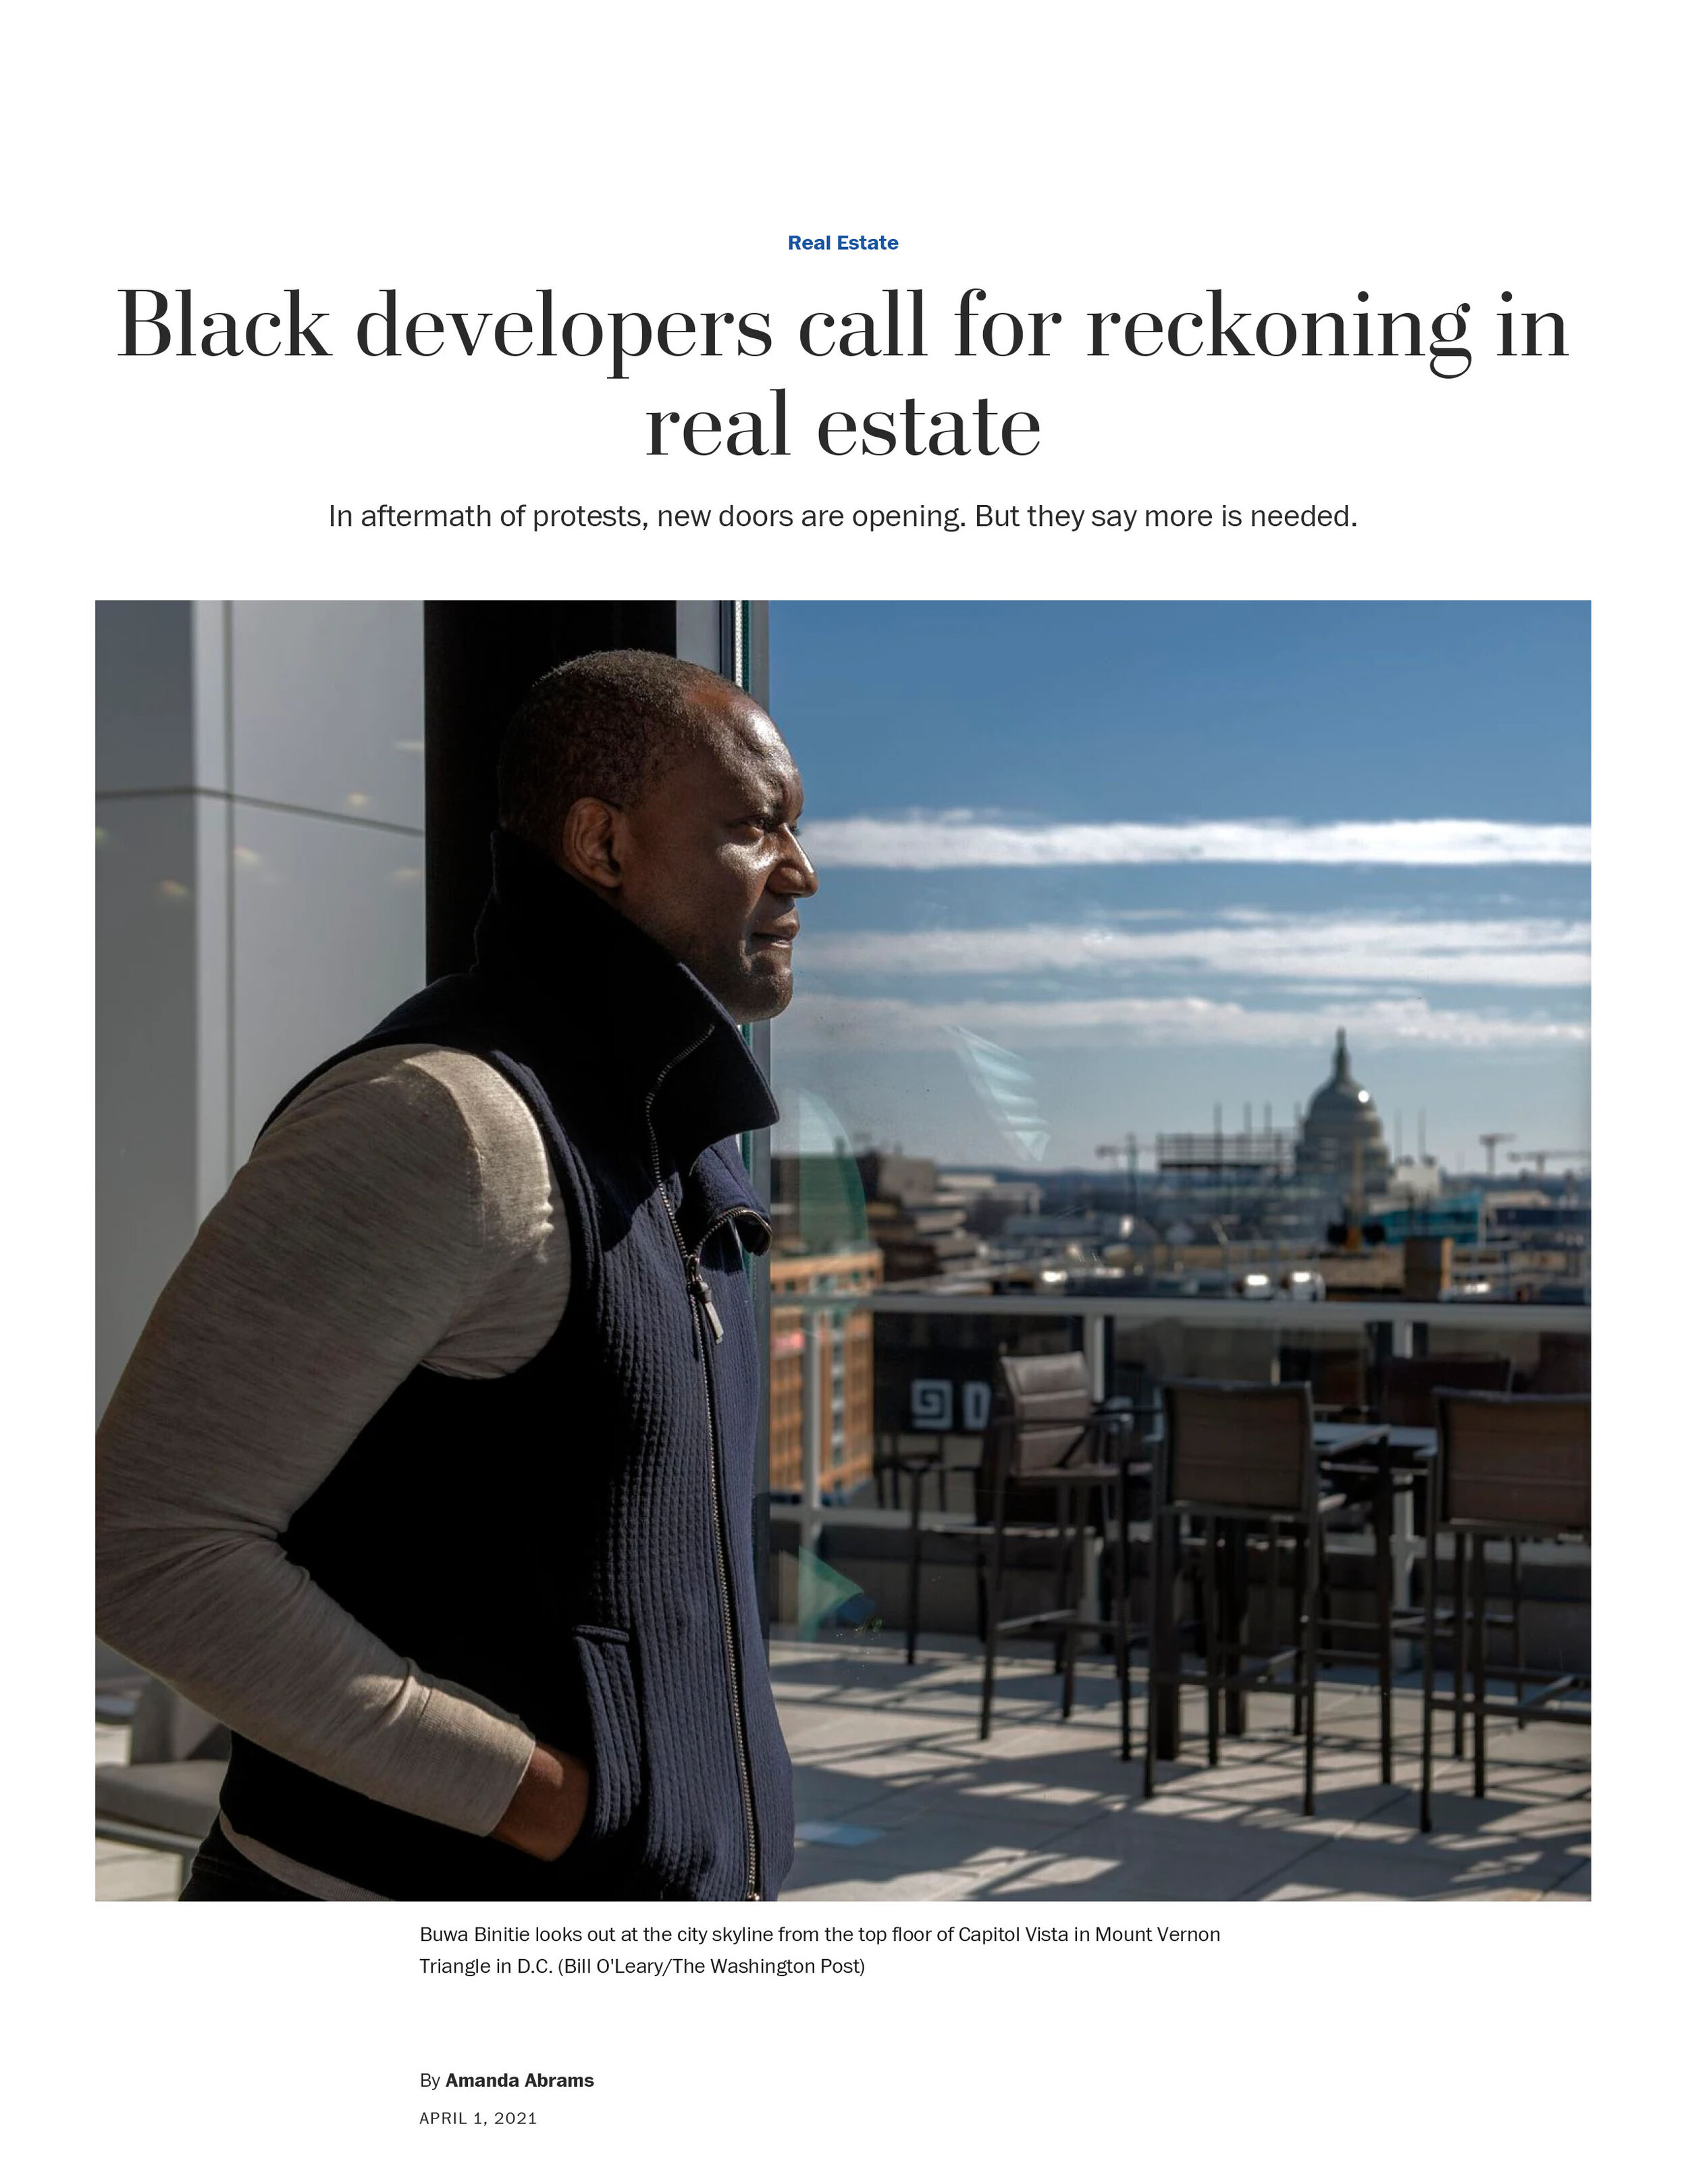 Black developers seek more capital and opportunities in real estate - The Washington Post-1 copy.jpg